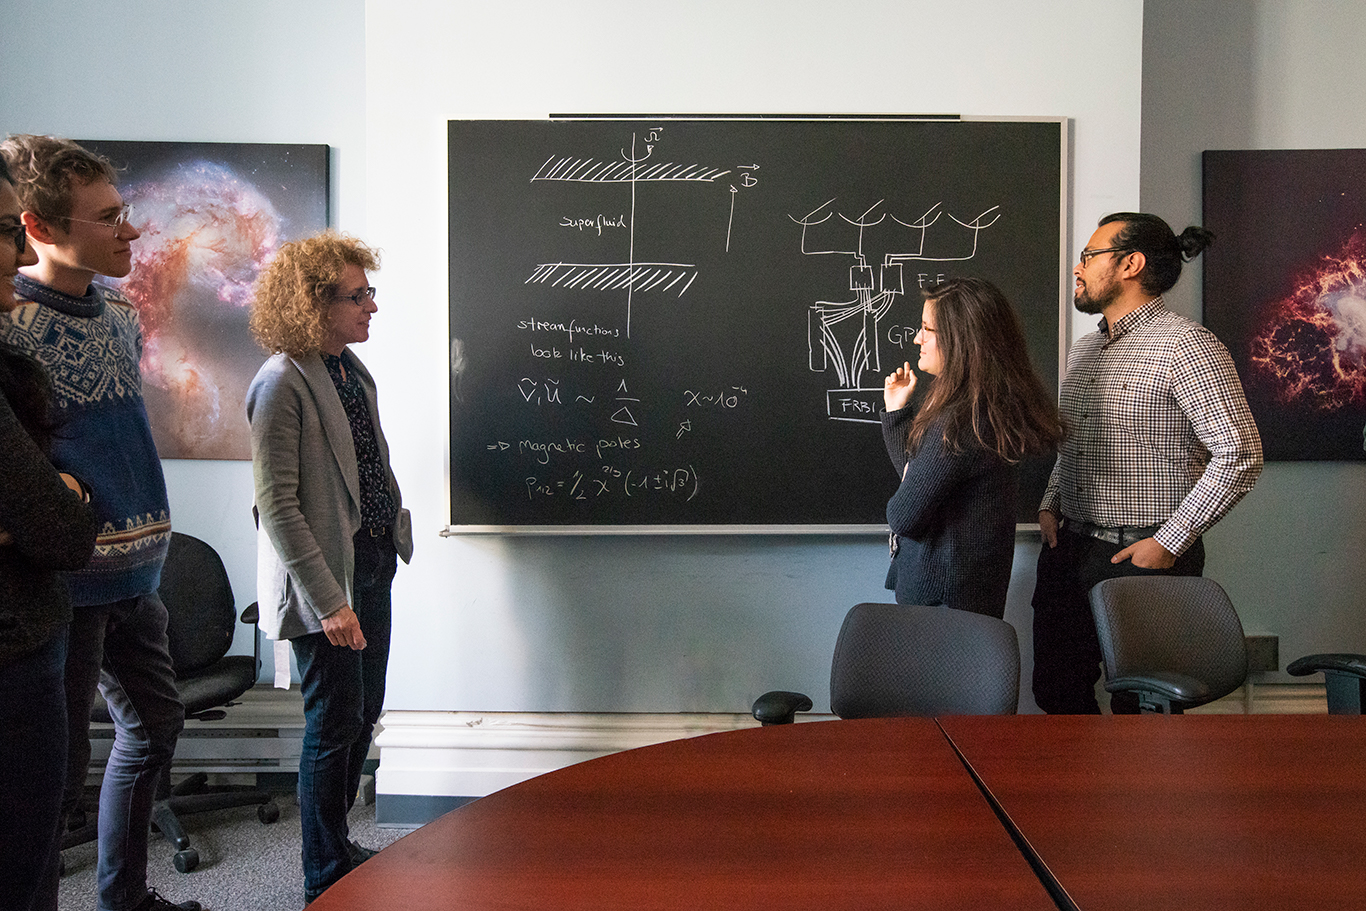 Professor Vicky Kaspi chatting with students in front of a blackboard.